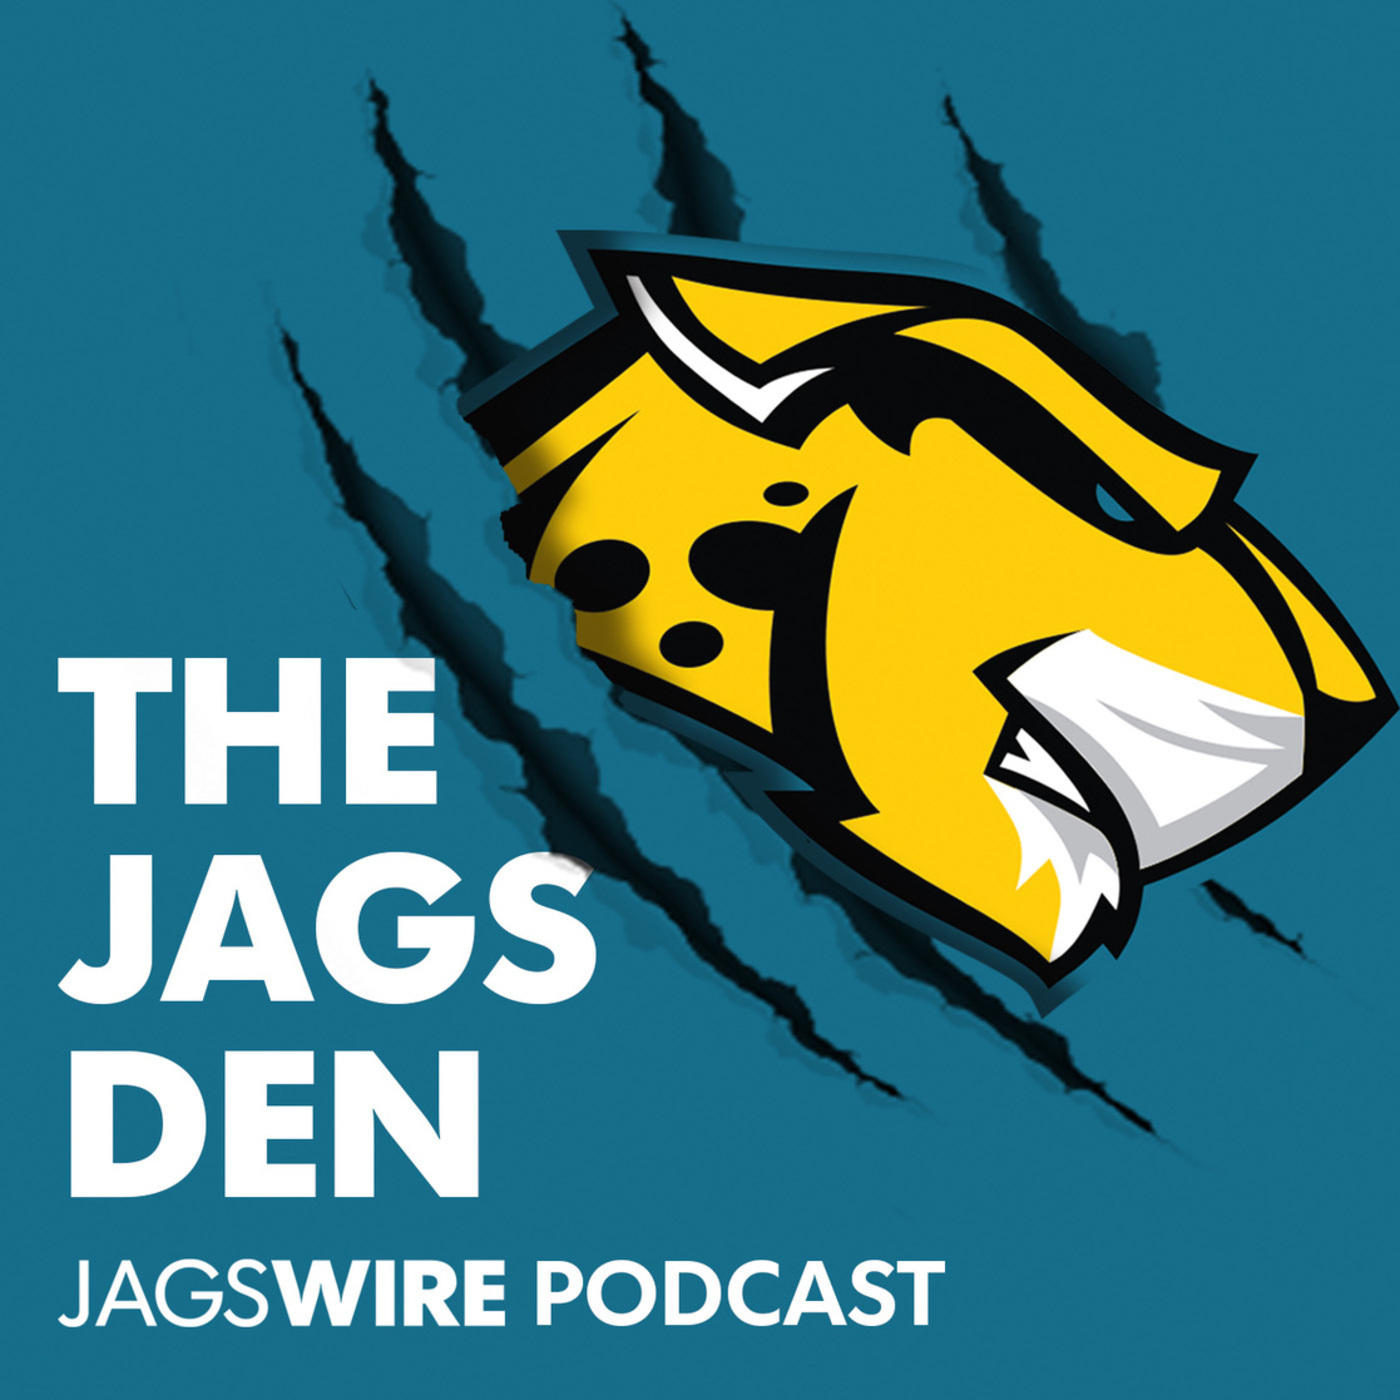 Jags Den Podcast Ep. 23: Mike Tiscione a.k.a. @BortlesFacts talks about BB5, the Jags outlook, charity, WWE and more! 